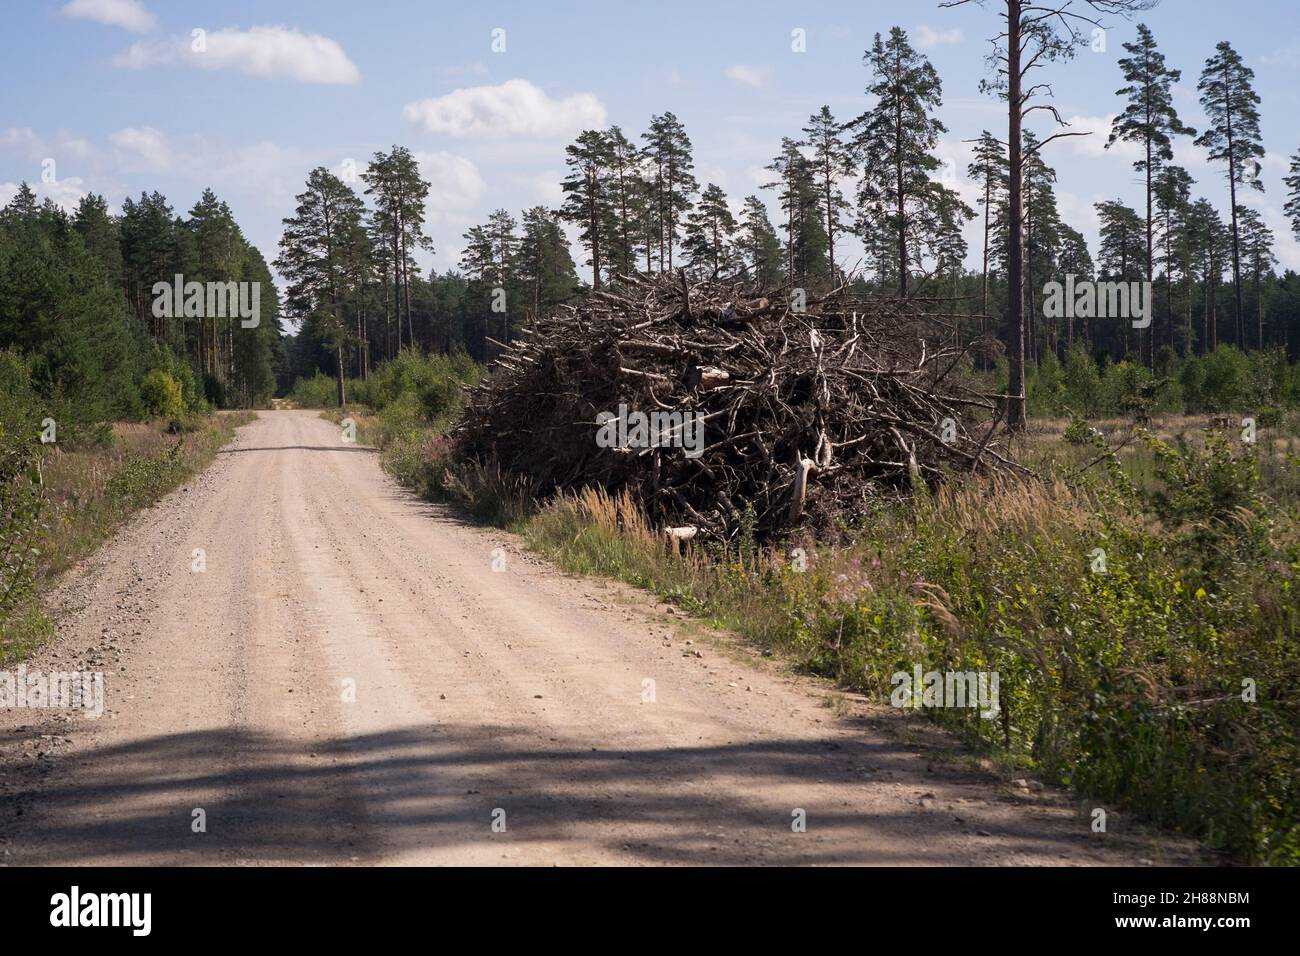 A pile of dead trees and branches on the side of a gravel road Latvia Stock Photo